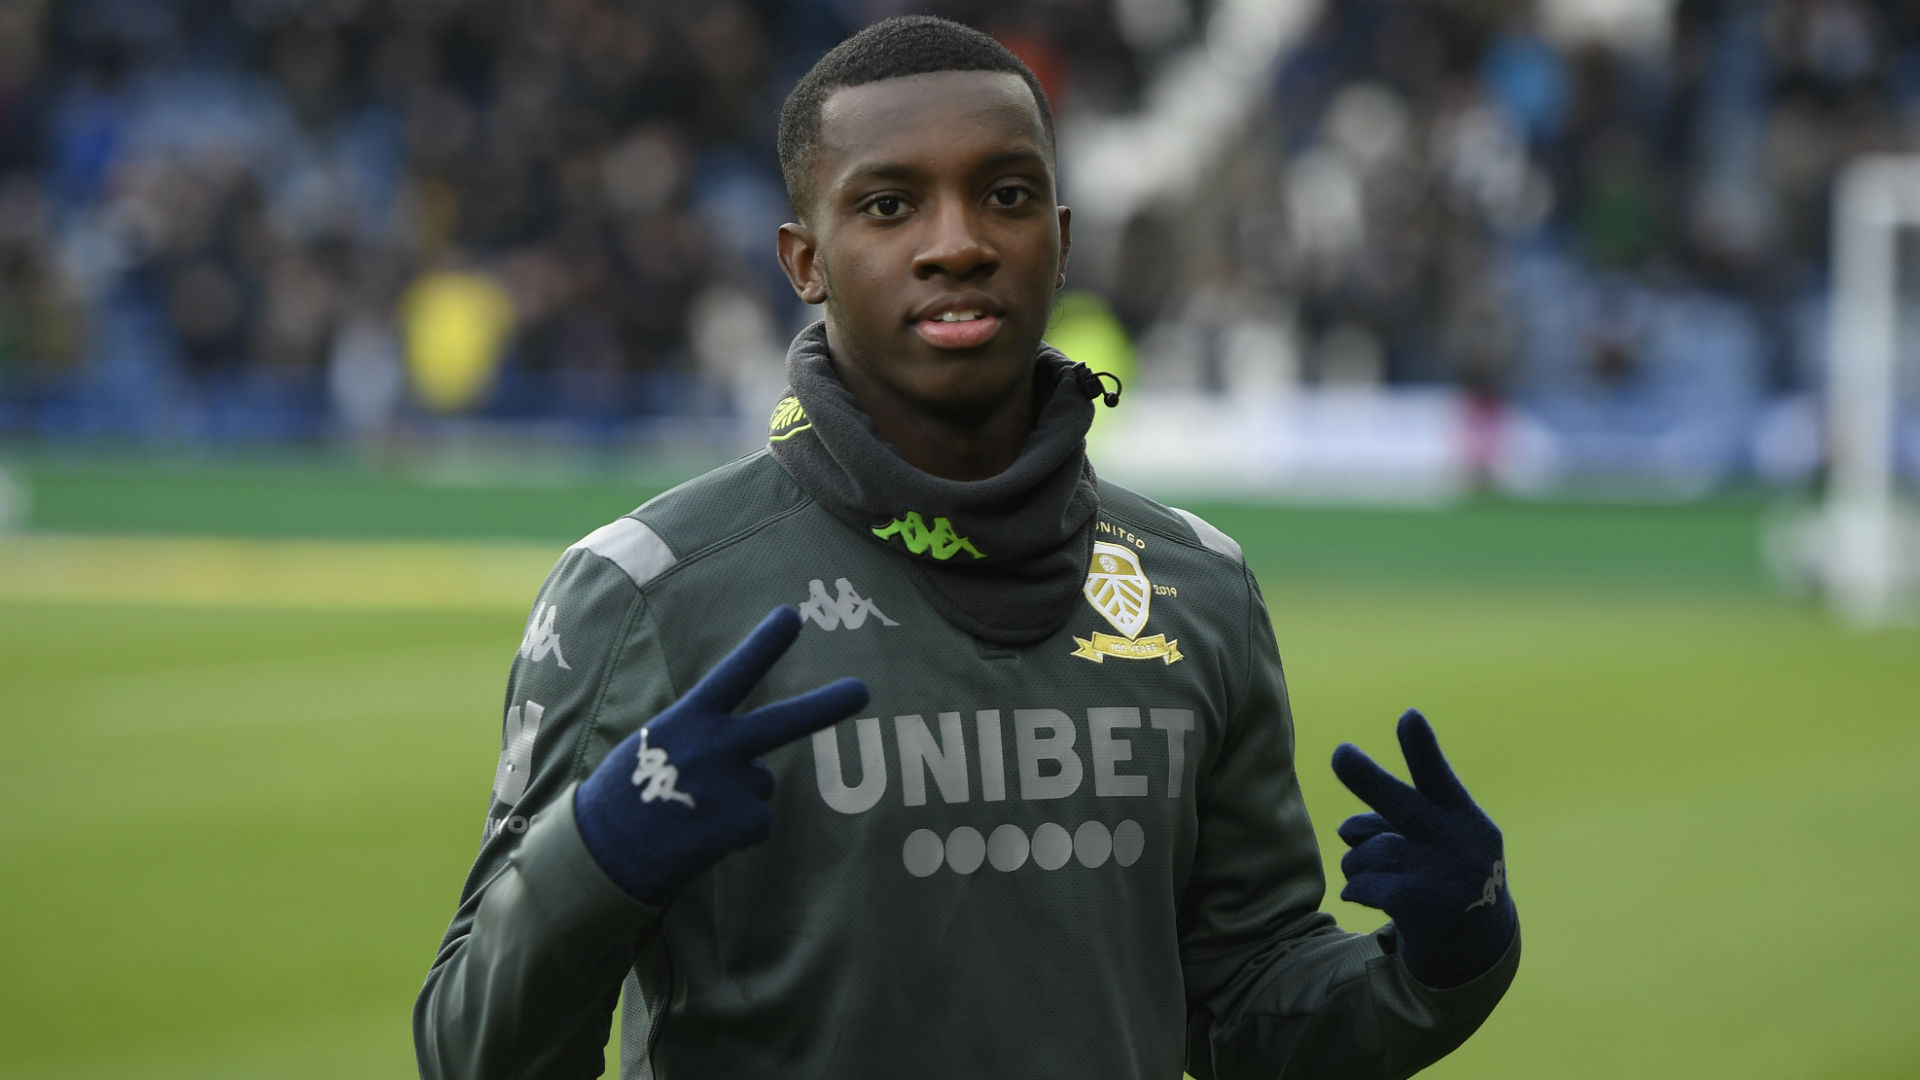 Nketiah features as Leeds United share spoils in entertaining draw with Cardiff City